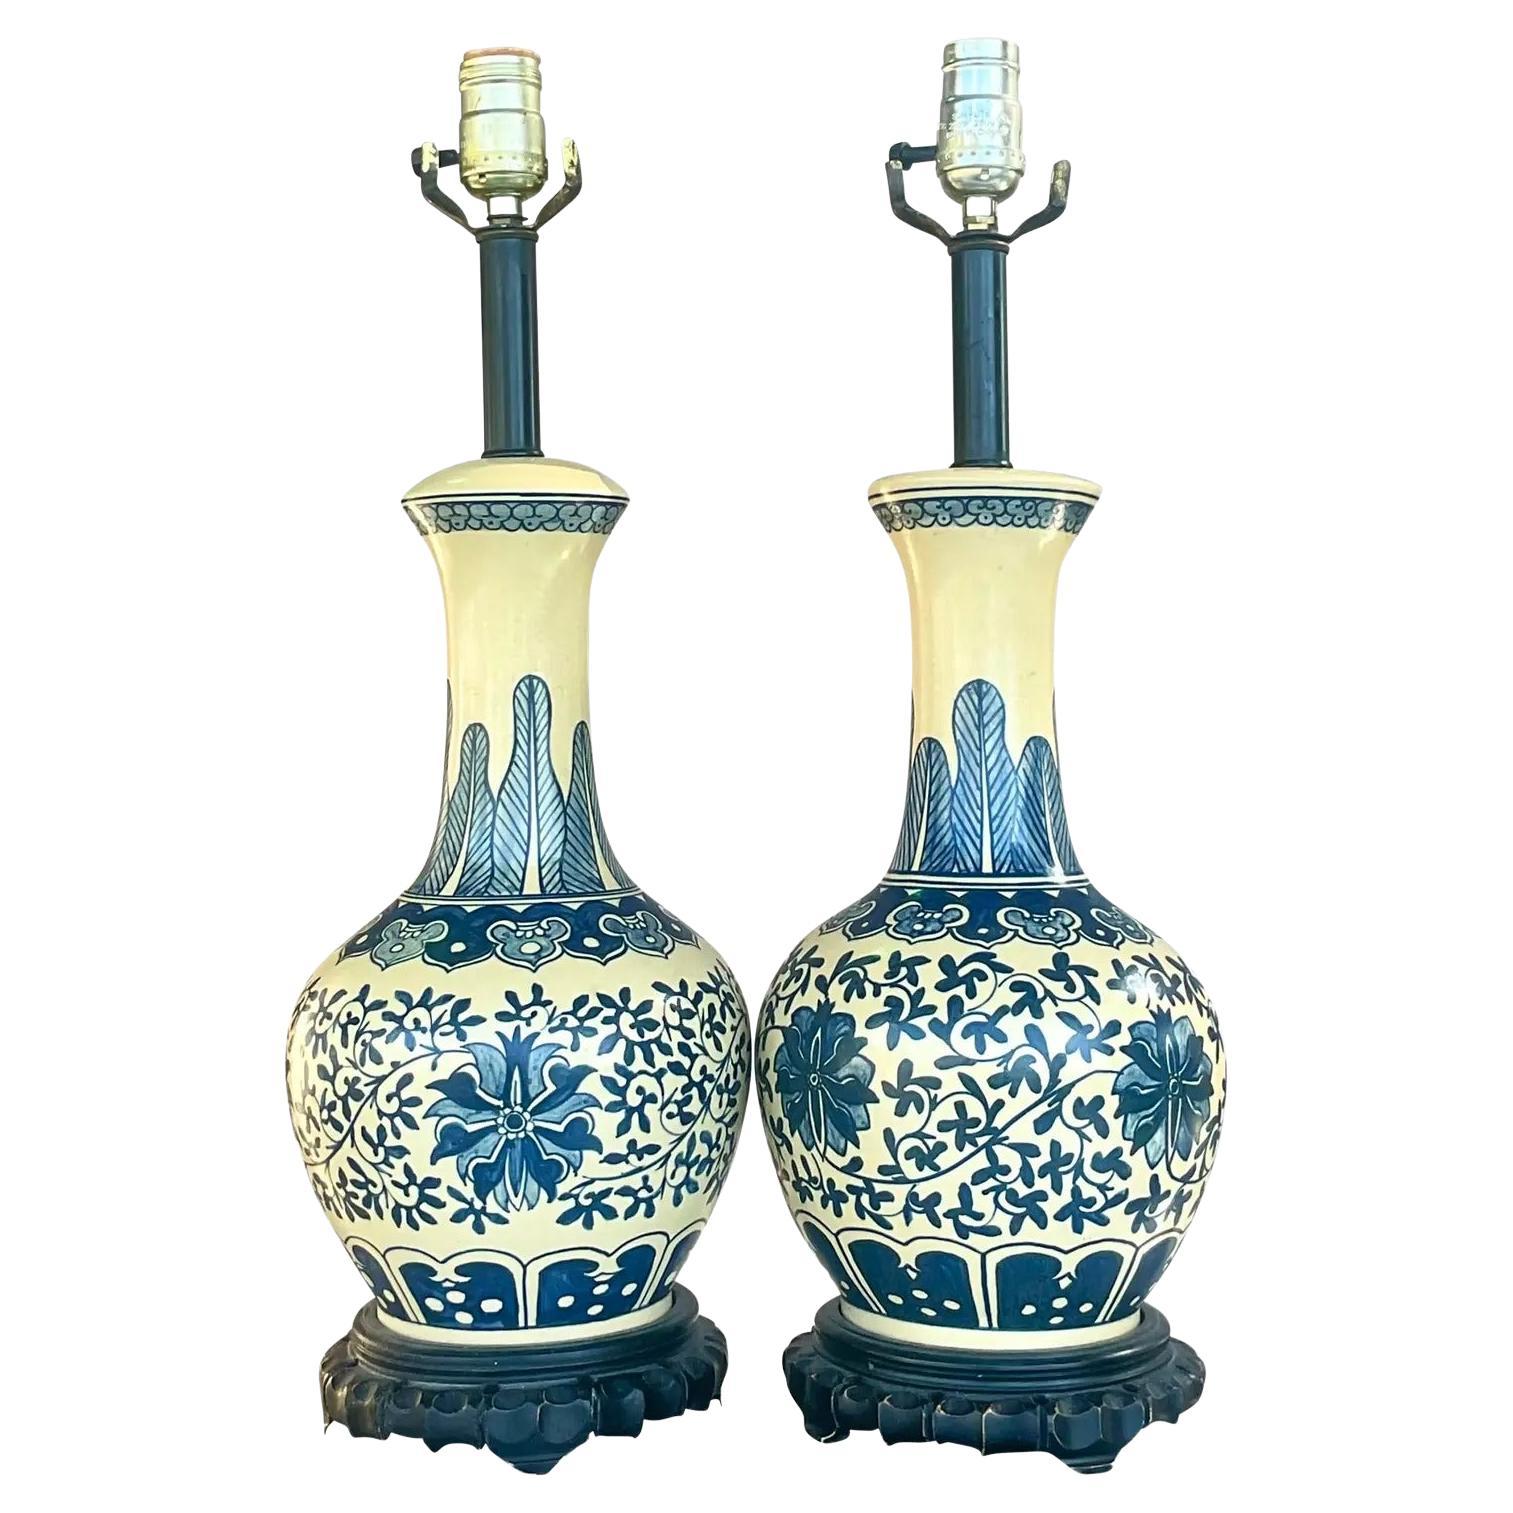 Vintage Boho Chic Hand Painted Gourd Lamps, a Pair